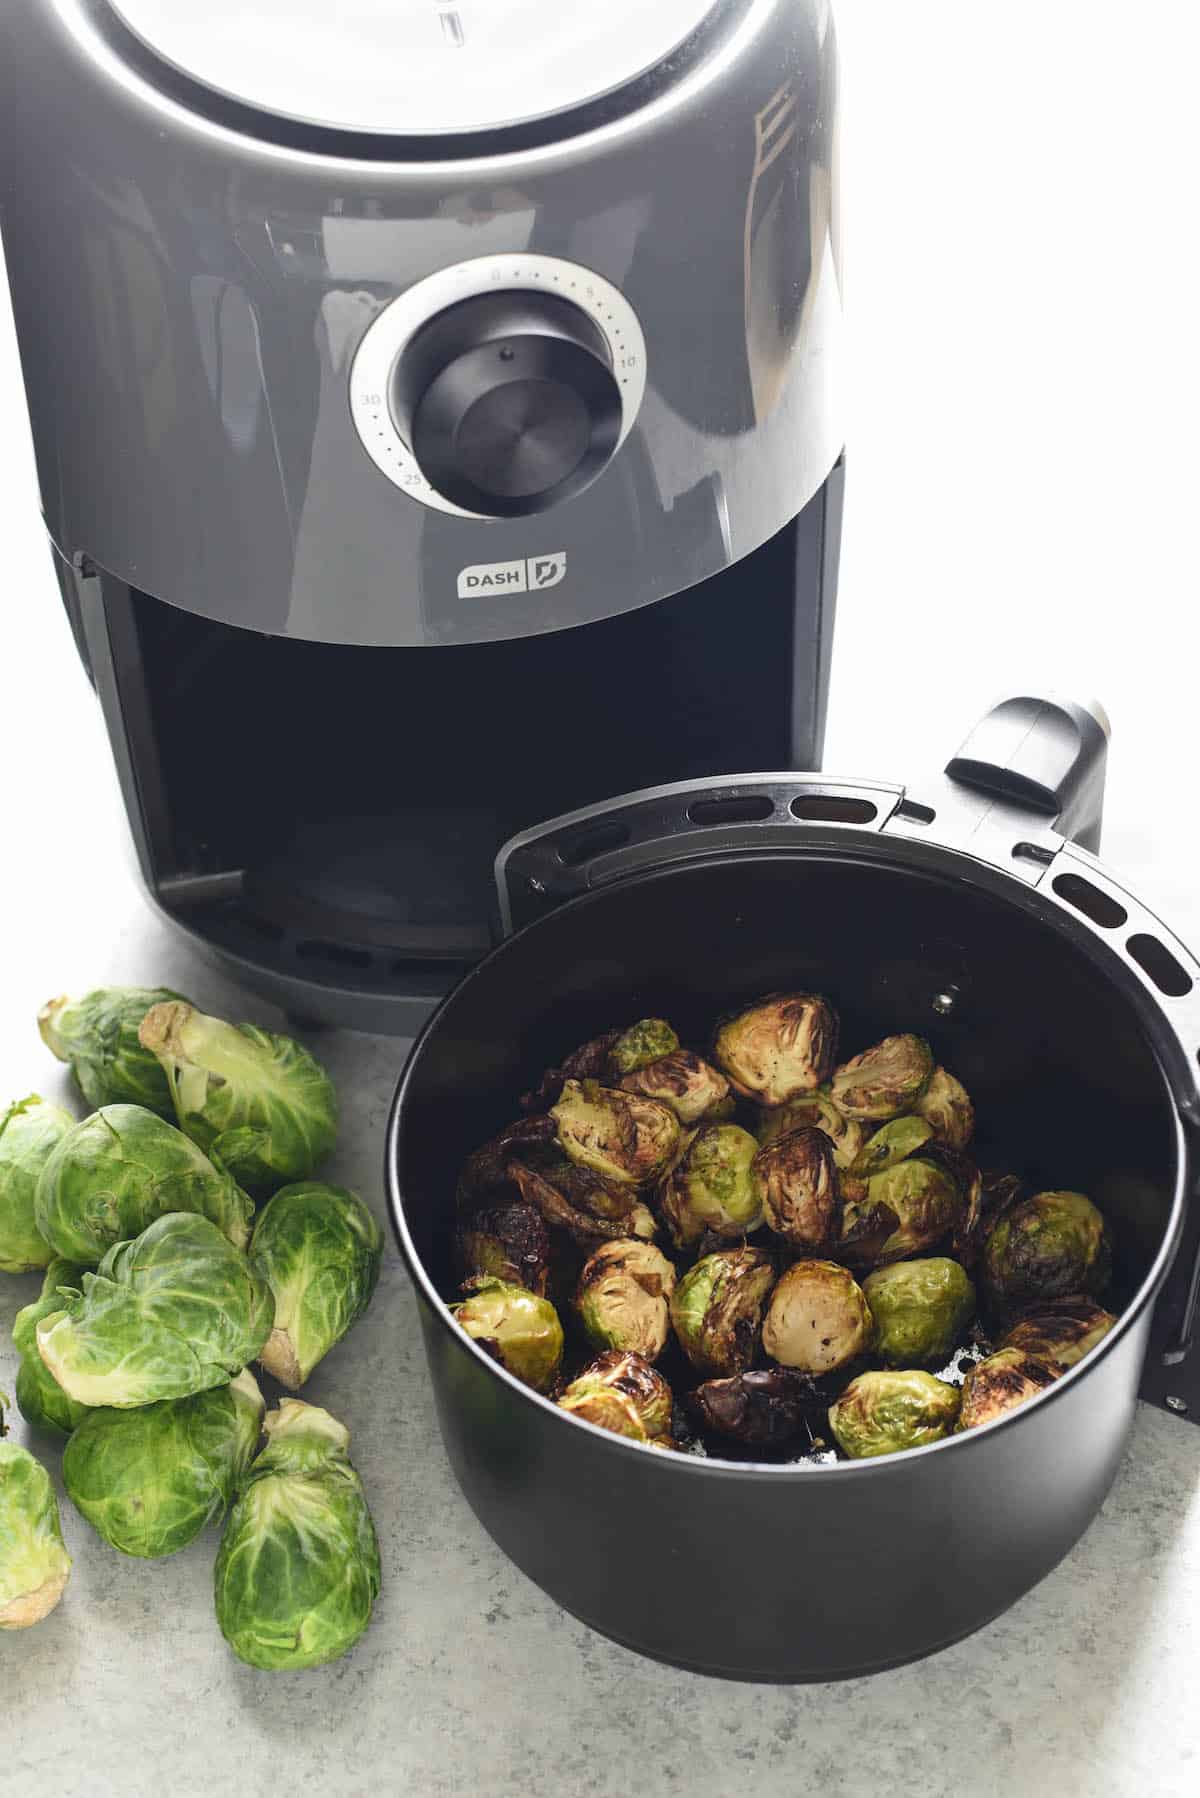 Brussel sprouts in air fryer basket with raw brussels sprouts on table.